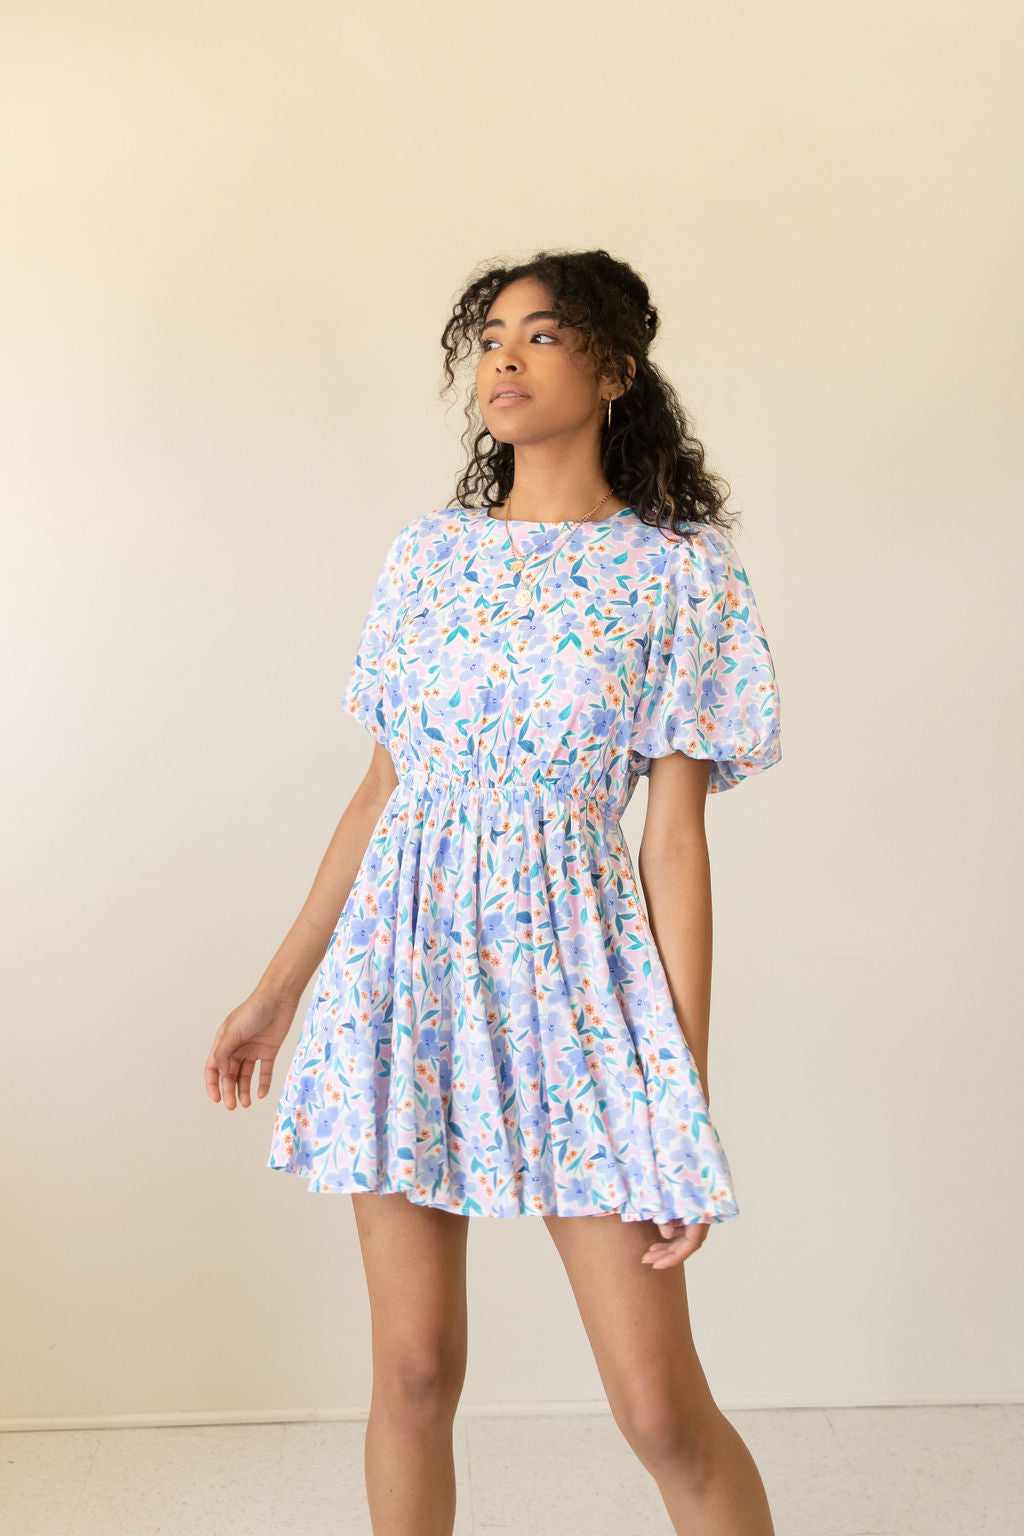 Starstruck Floral Dress by For Good